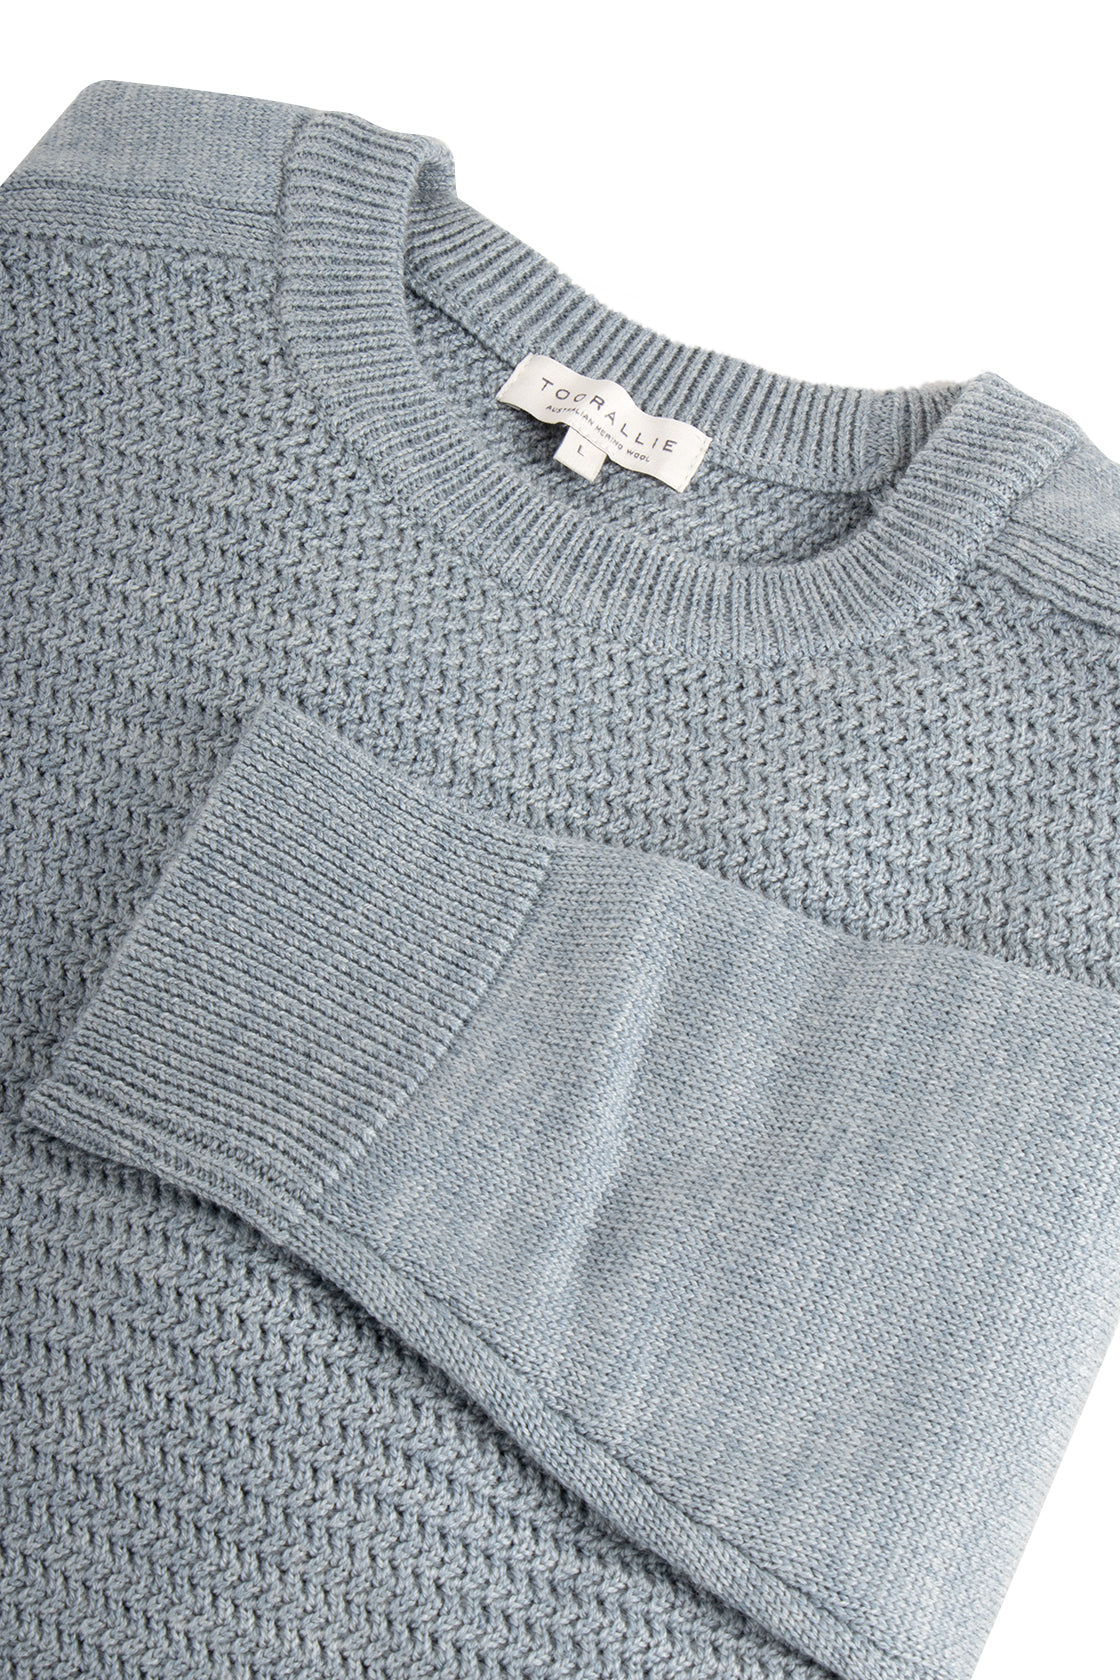 Toorallie Hotham Crew Knit Mineral